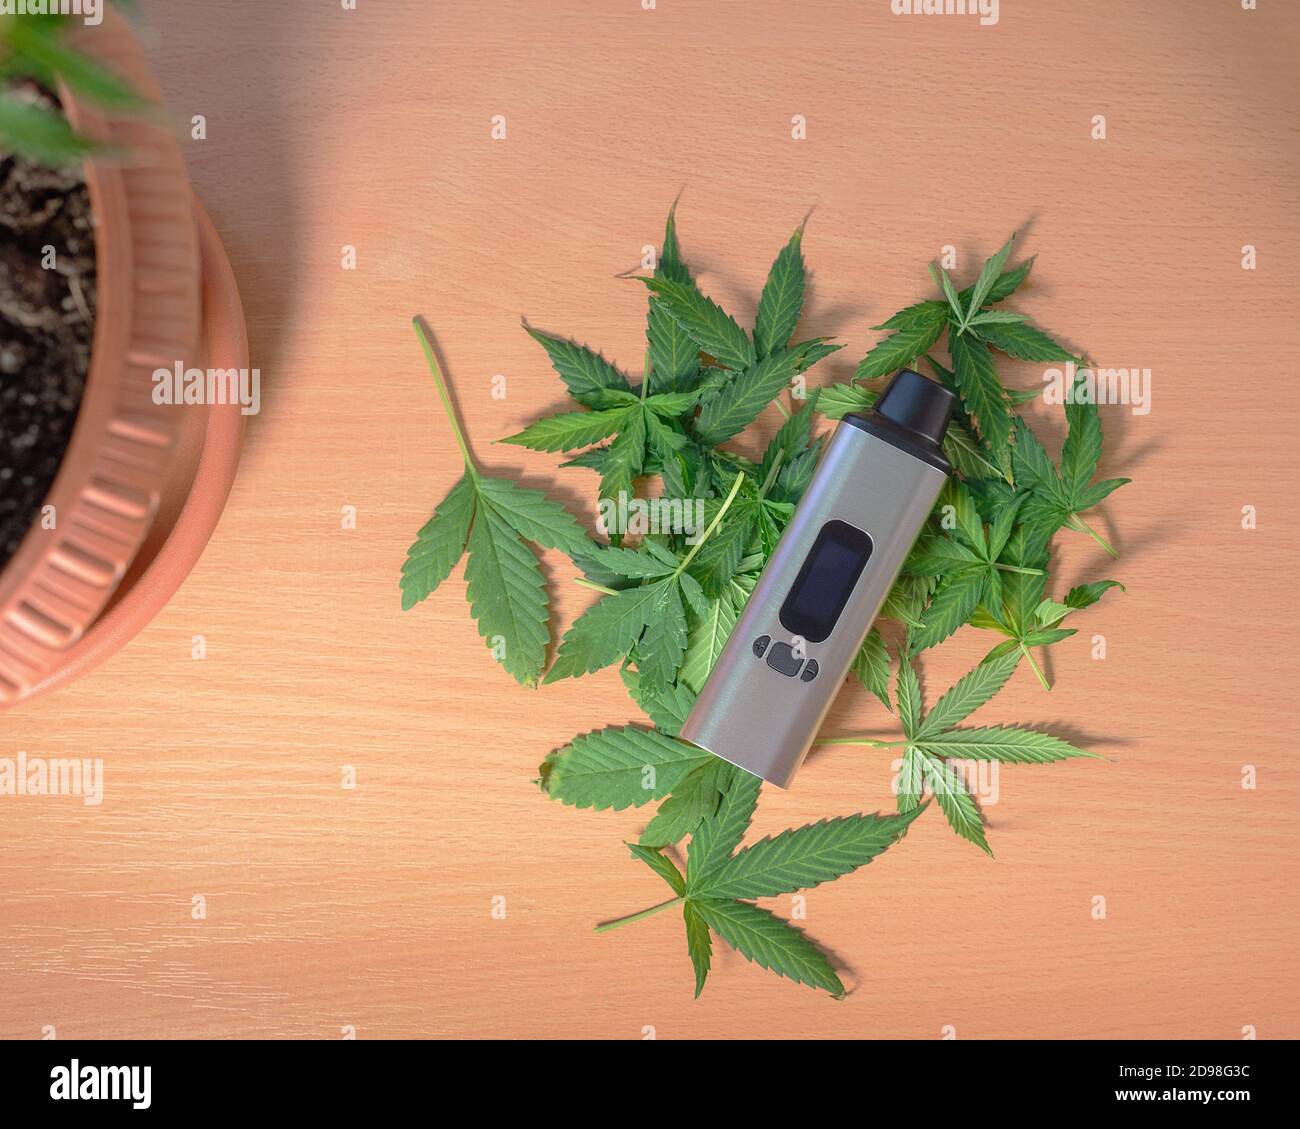 portable electronic vaporizer for smoking dry herbs next to hemp leaves on the table Stock Photo